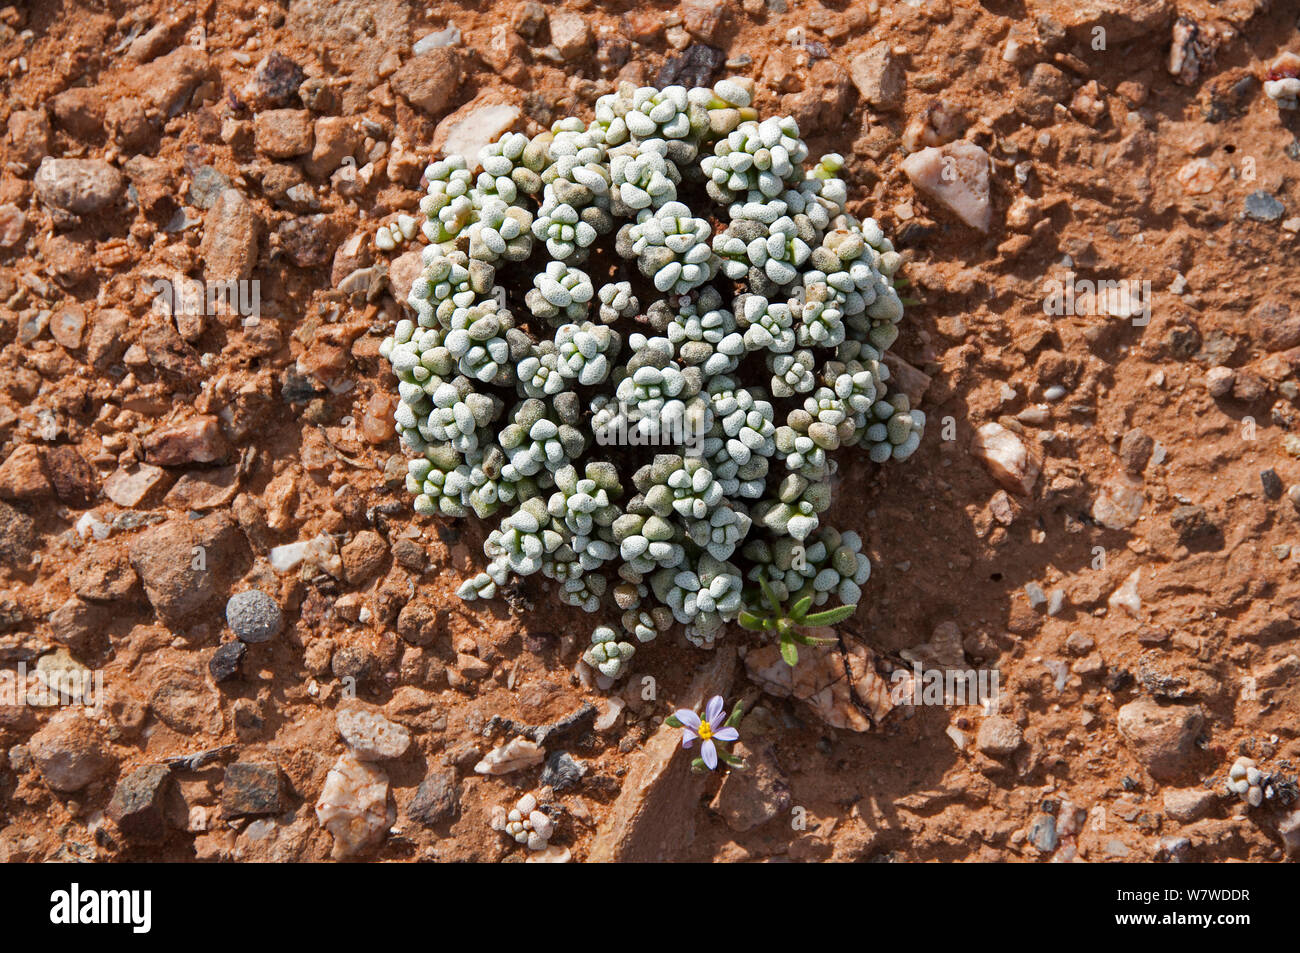 Coral crassula (Crassula corallina) Richtersveld National Park and World Heritage Site, Northern Cape, South Africa, August. Stock Photo